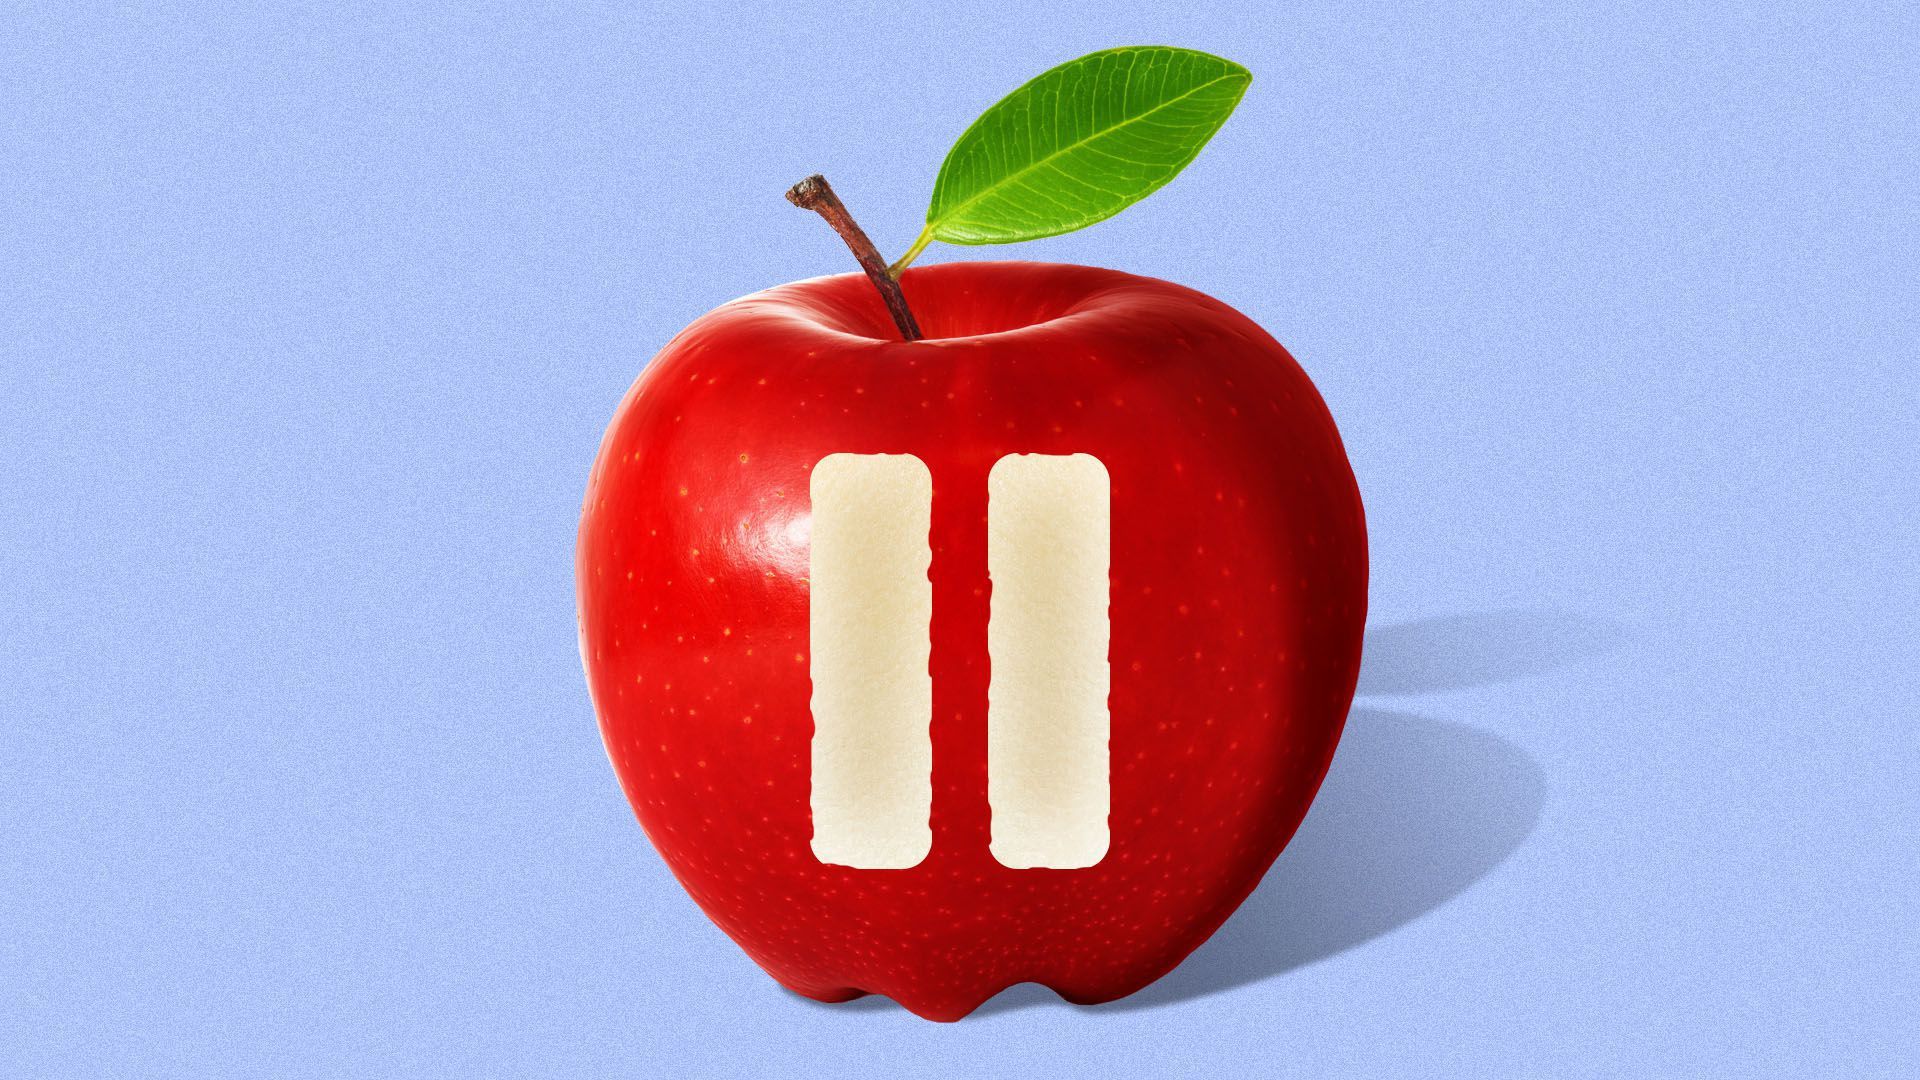 Illustration of an apple with a pause symbol carved into it.